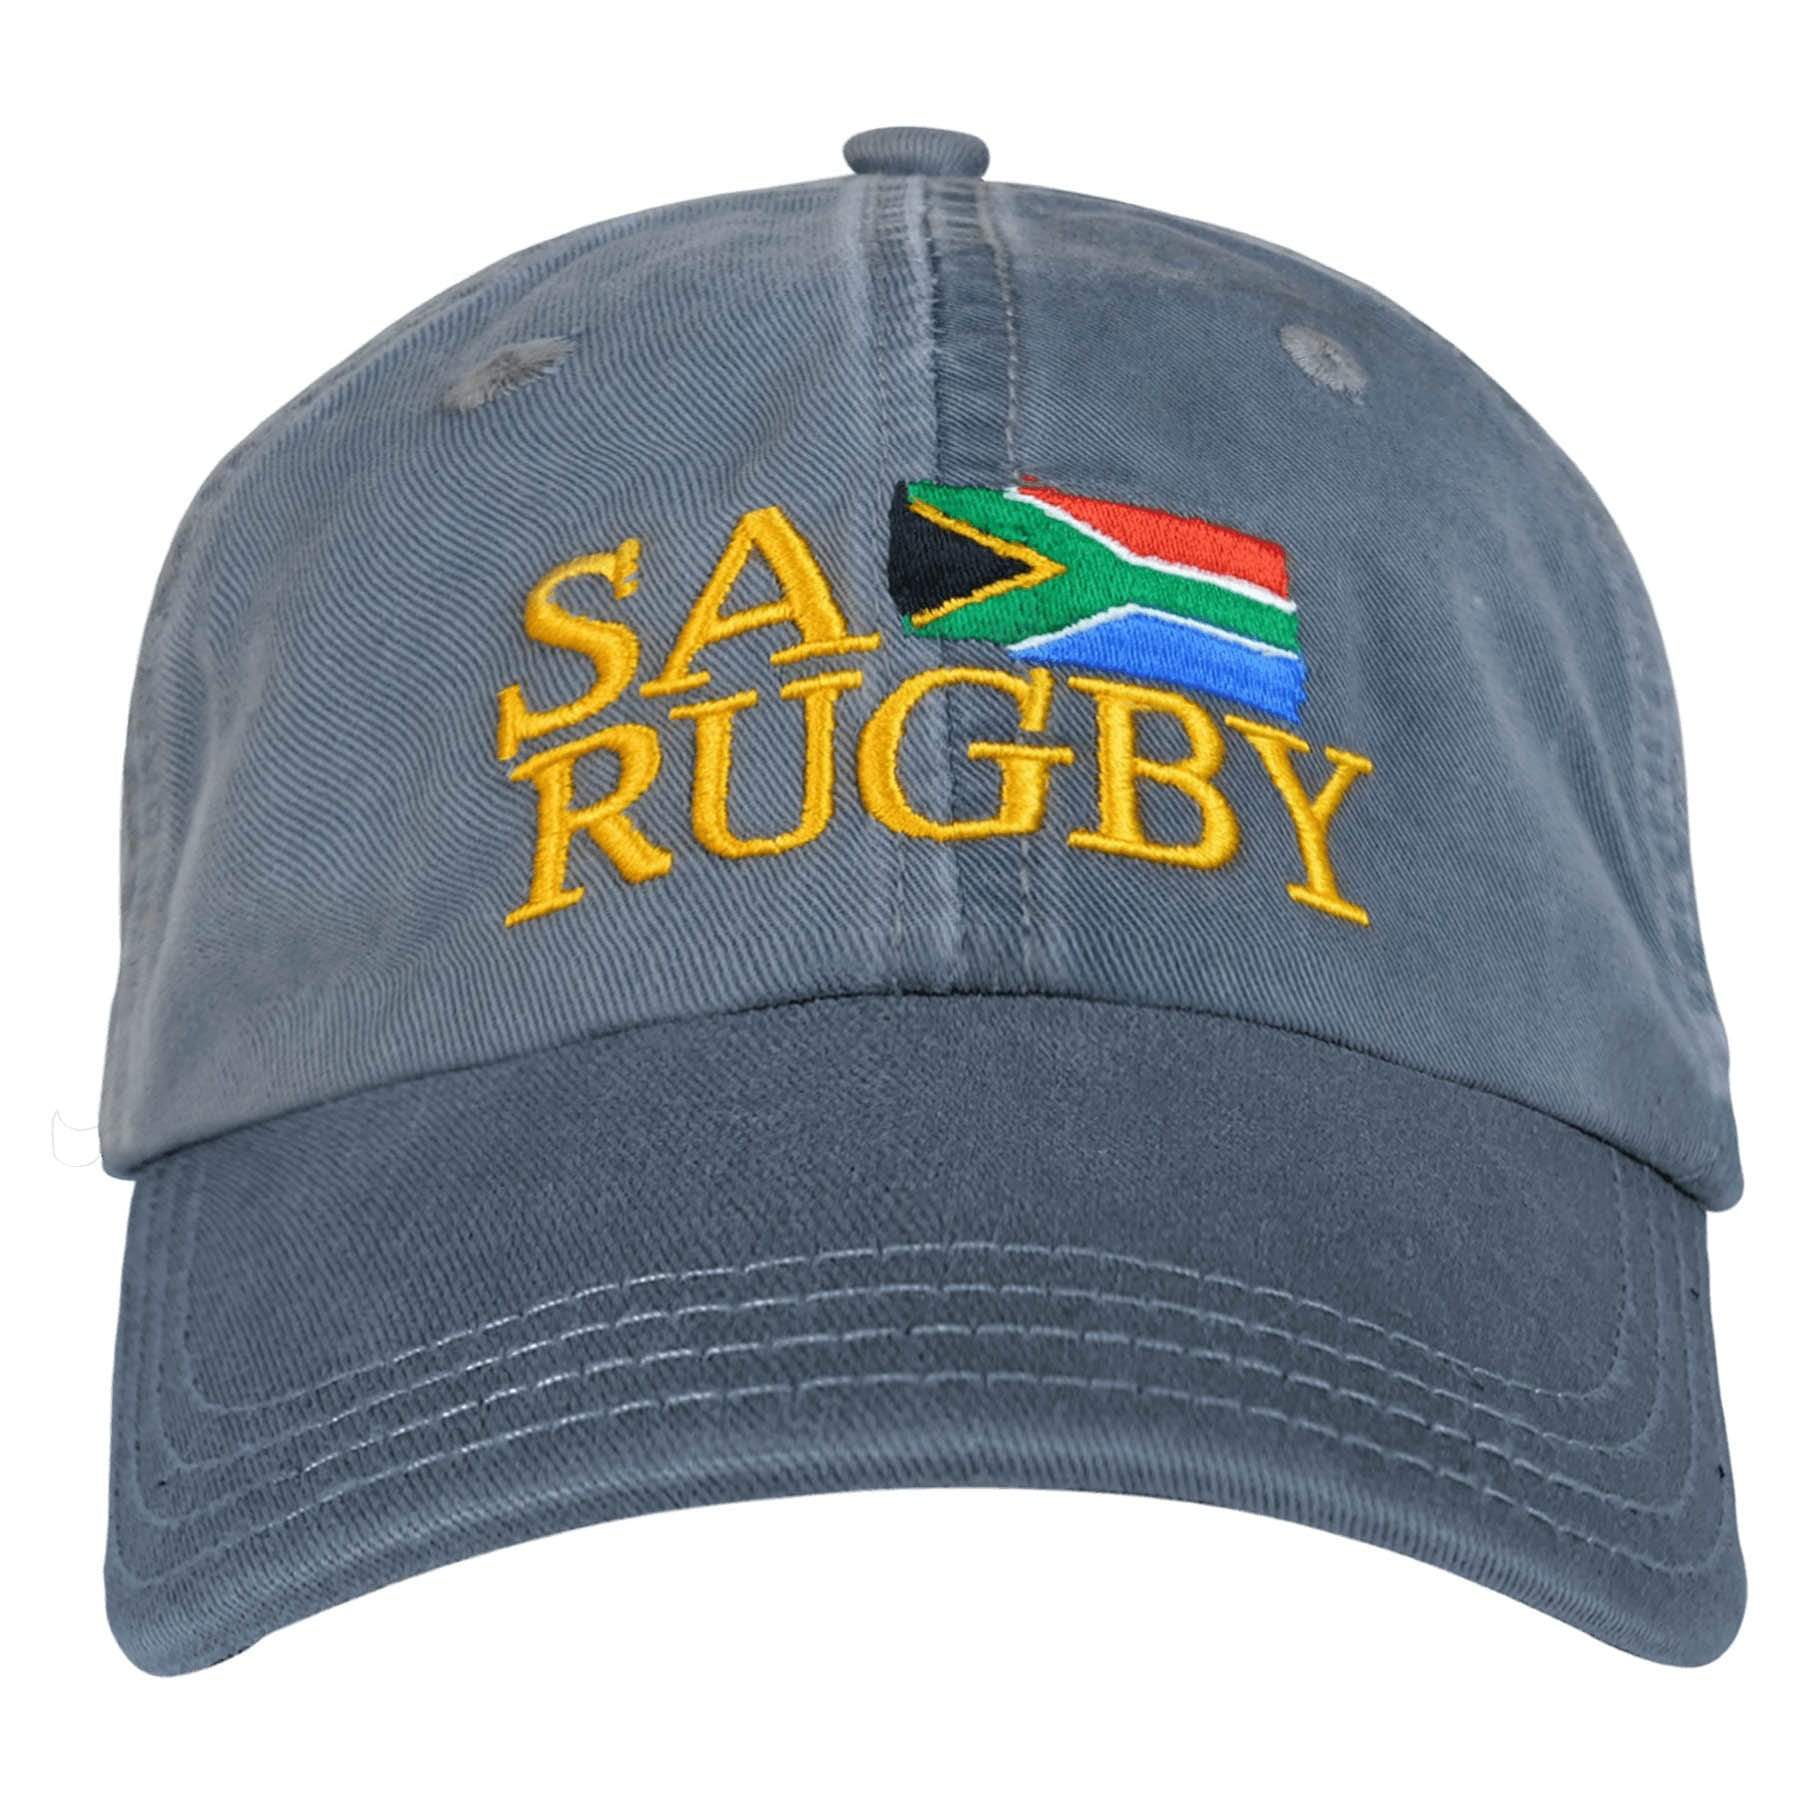 Rugby Hats and Caps - Rugby Imports